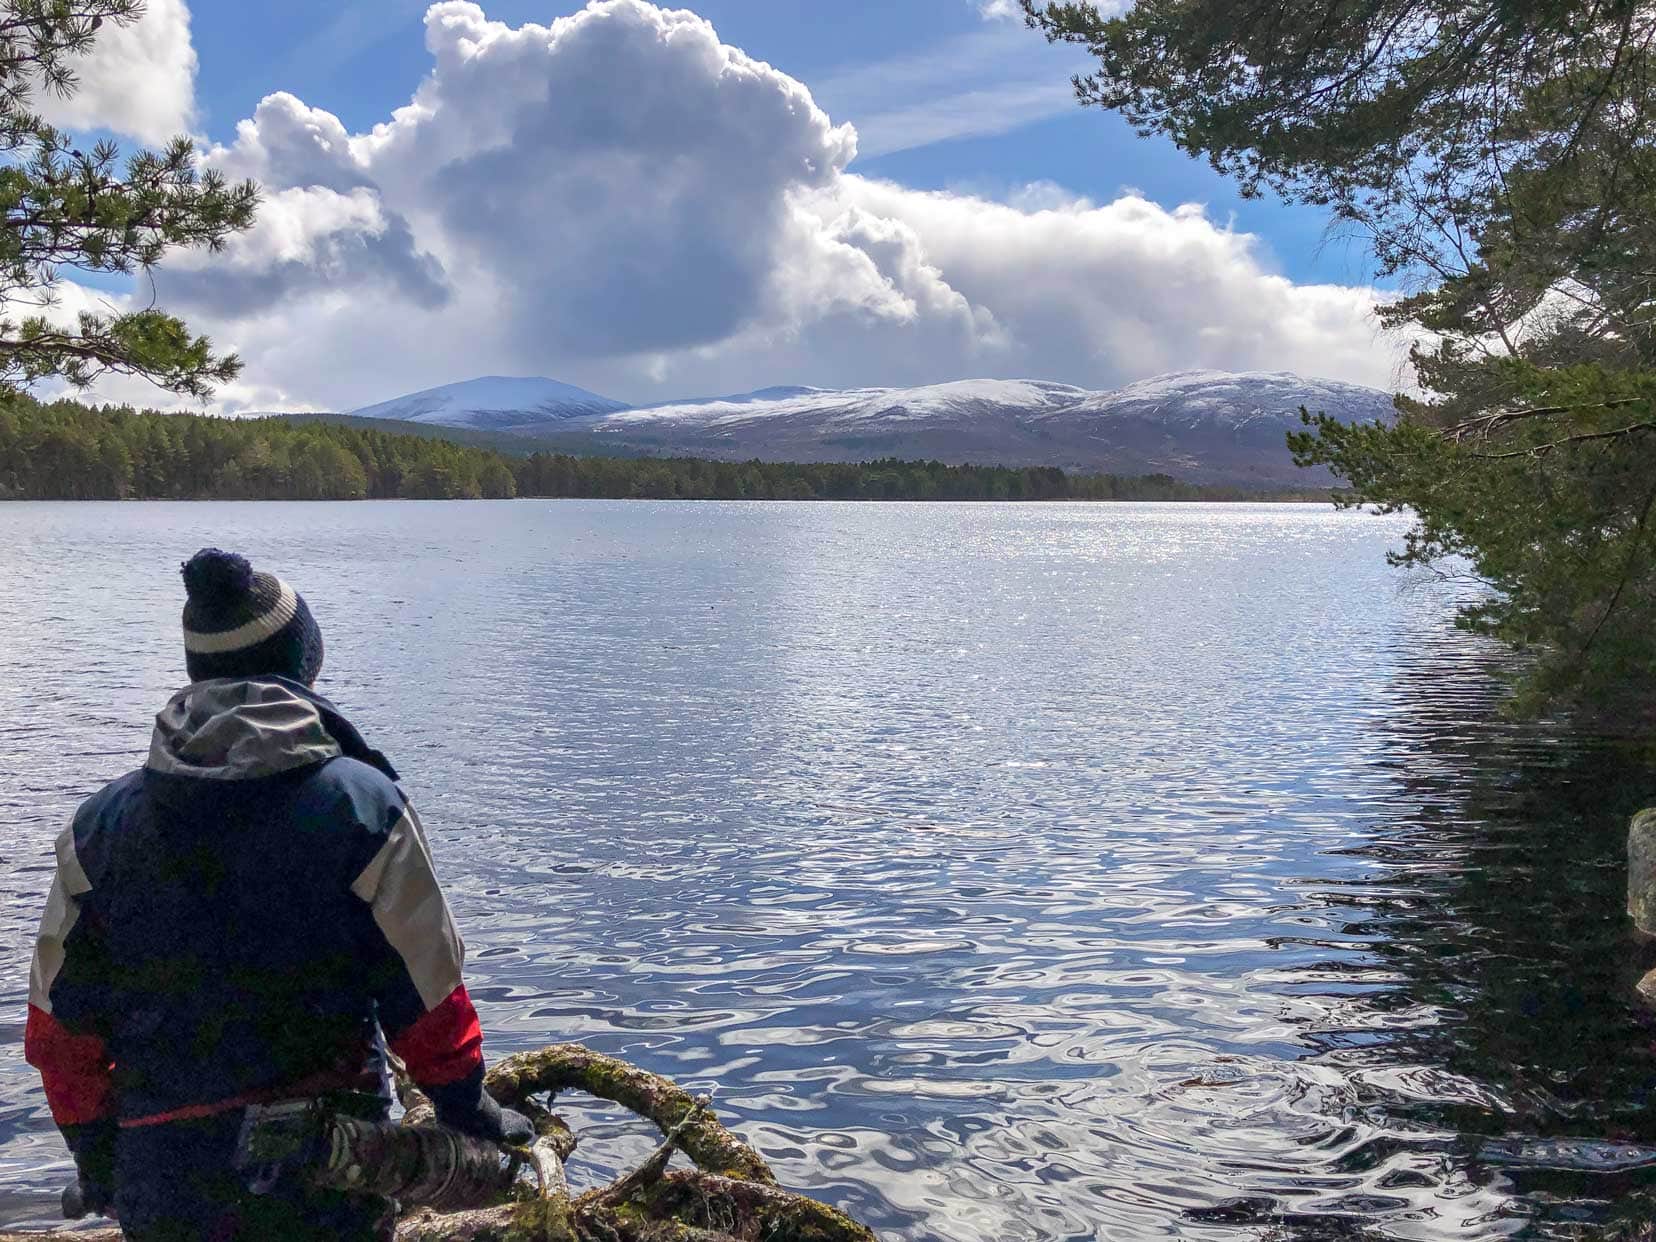 Lars looking out onto Loch Garten and the views of snow topped mountains in the distance